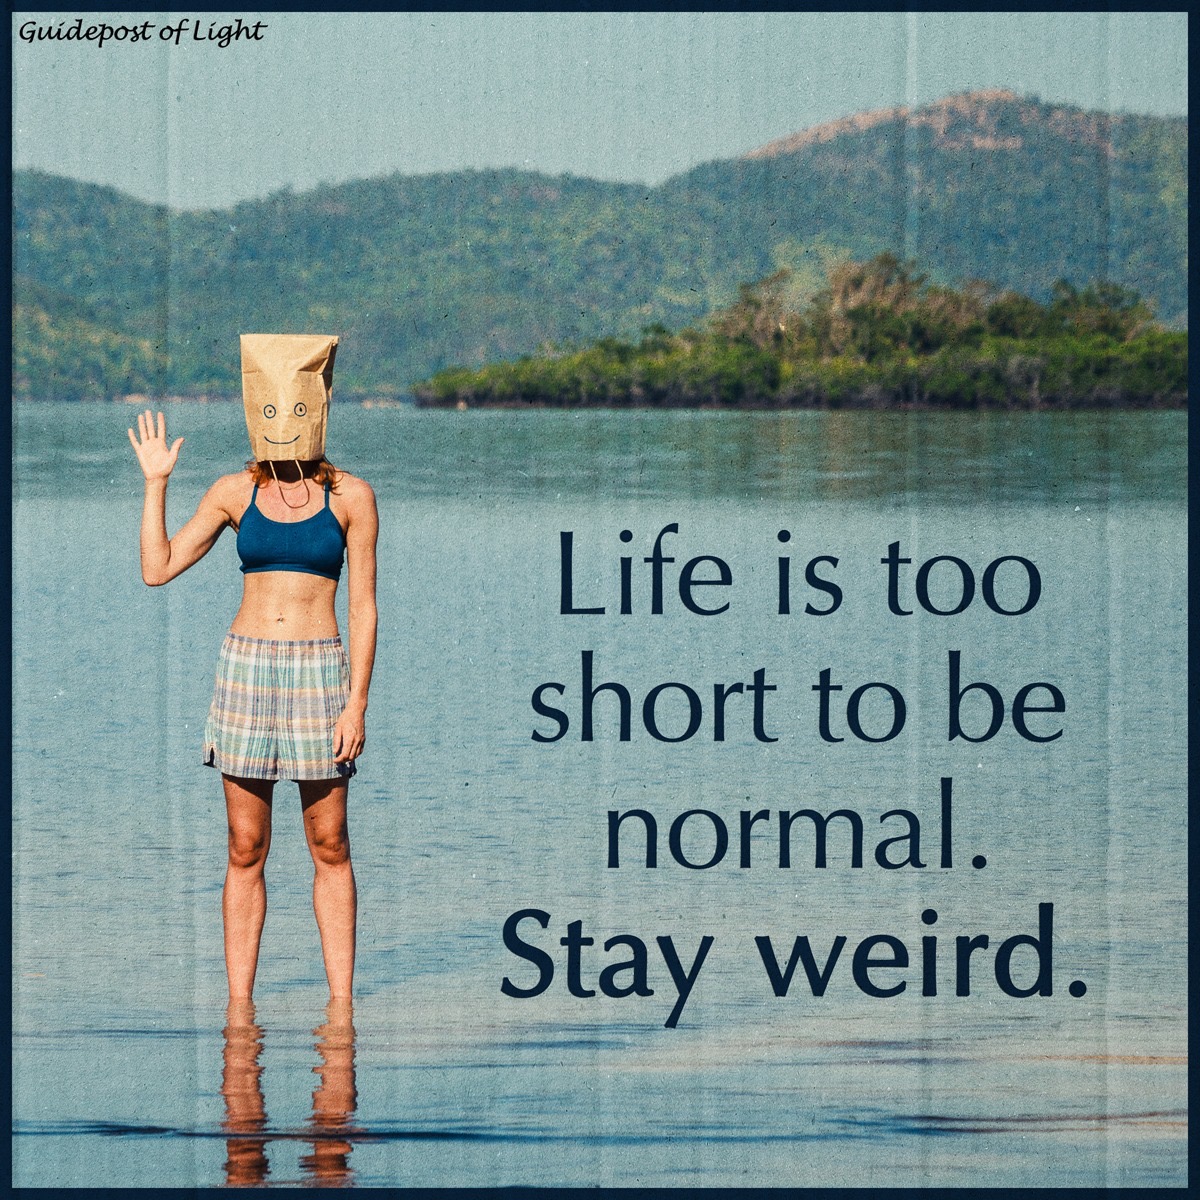 Life is funny. Life is short. Life is too short to be normal stay weird. Life's too short. Life is...too short.